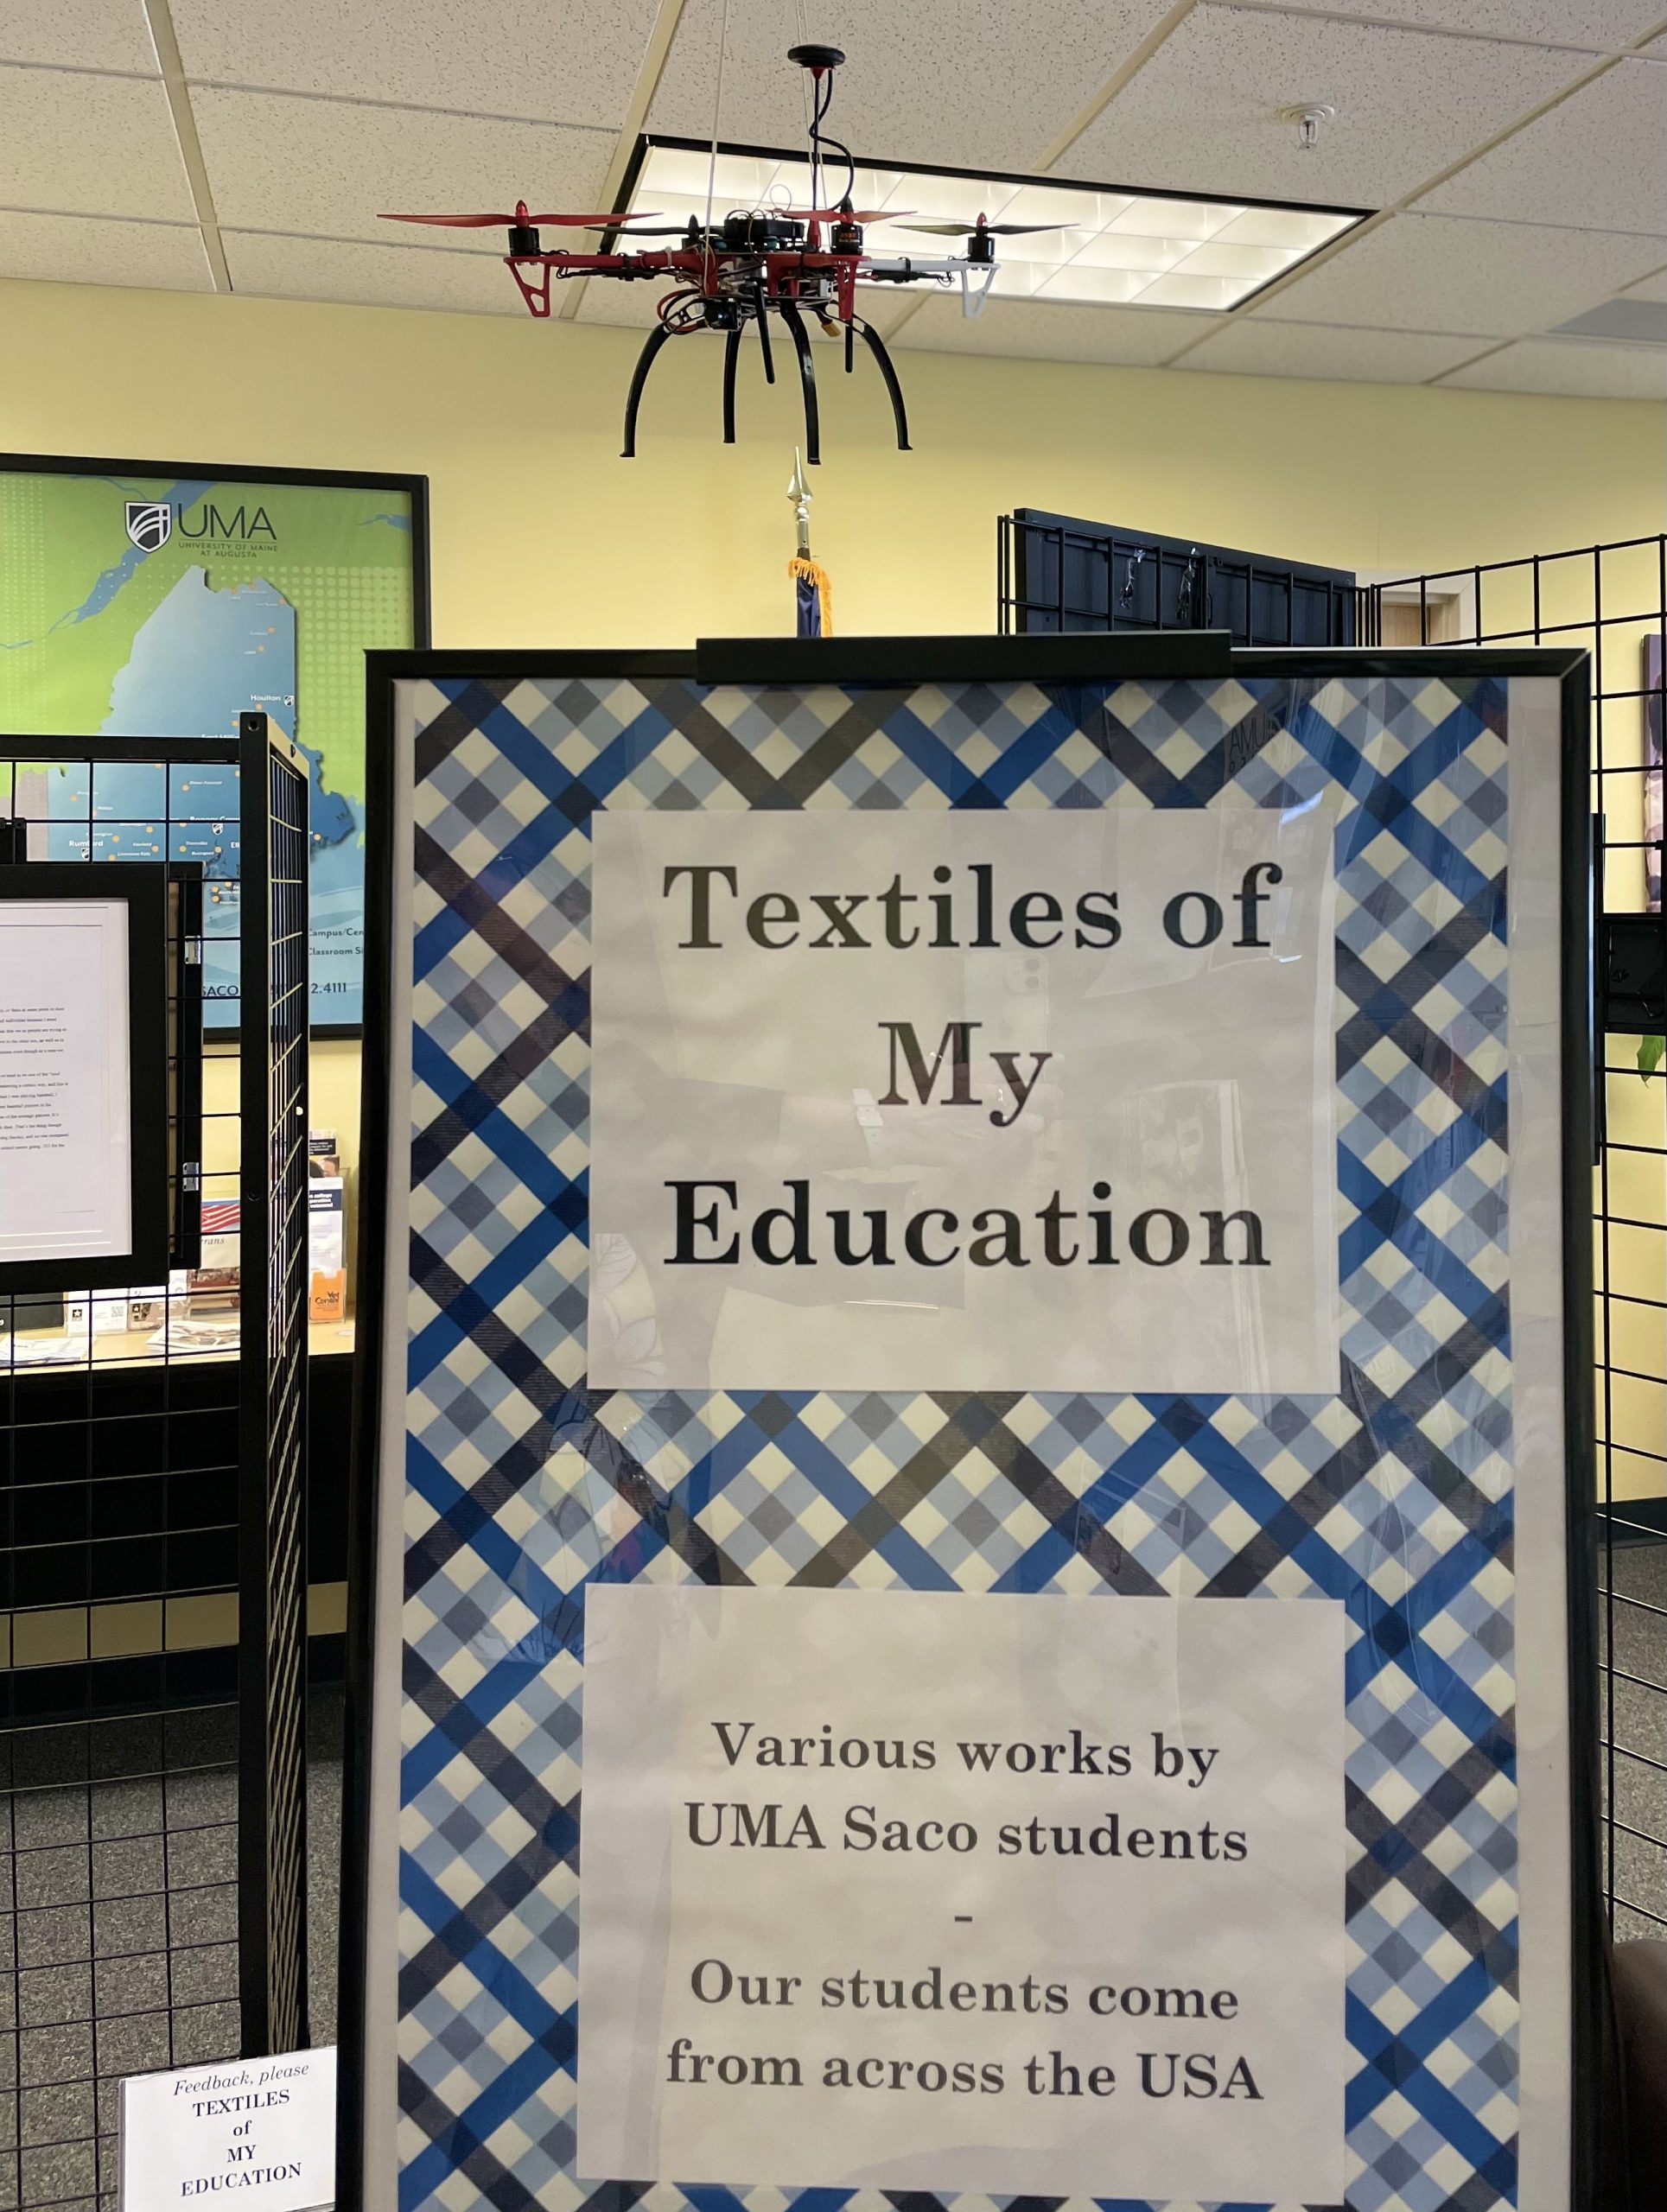 The entrance to the display of student work is a sign with a plaid background which reads "Textiles of my education. 